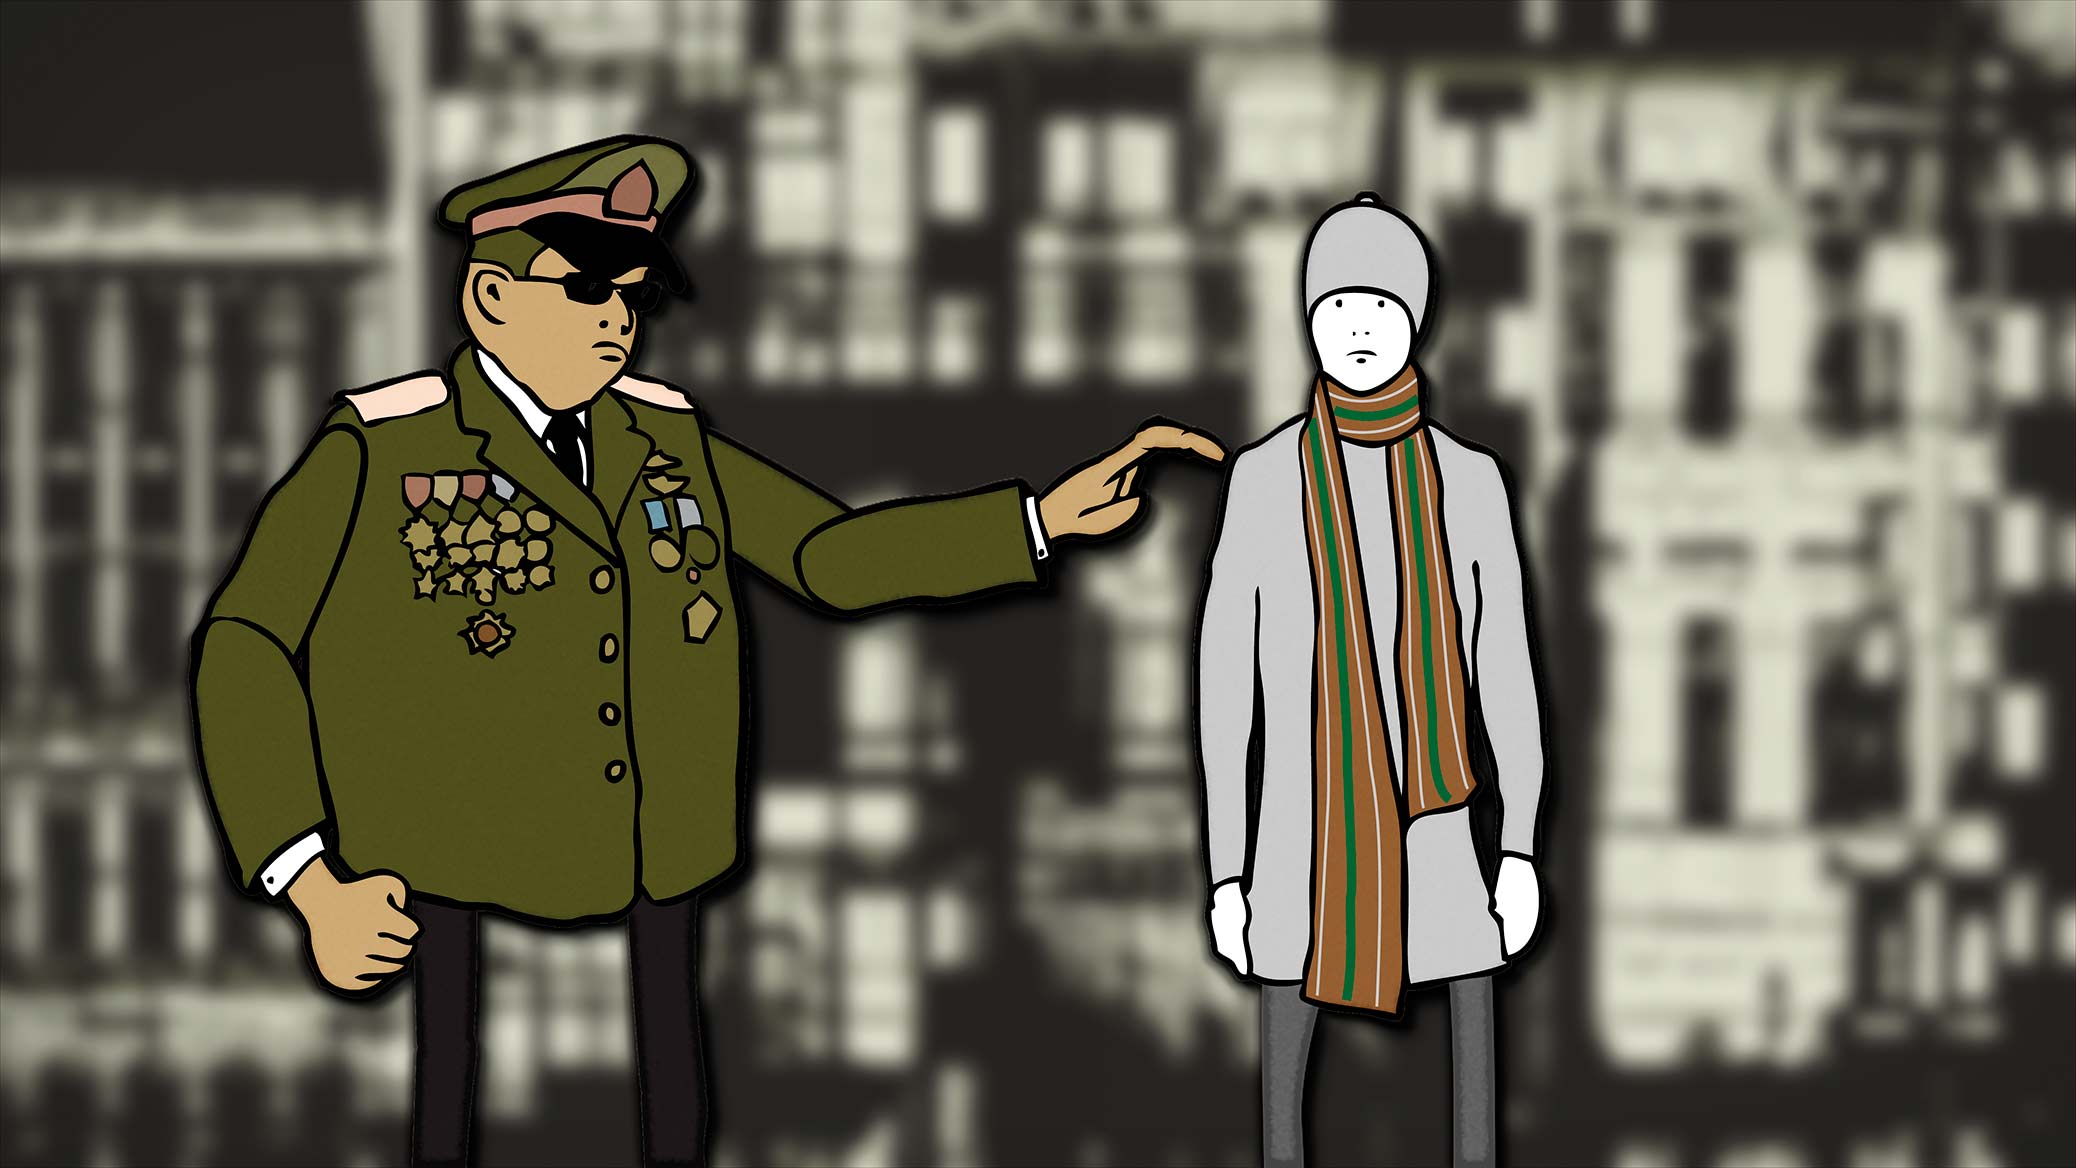 The Warmest Winter in 250 Years, film still from animation. Policeman approaches young man in scarf.